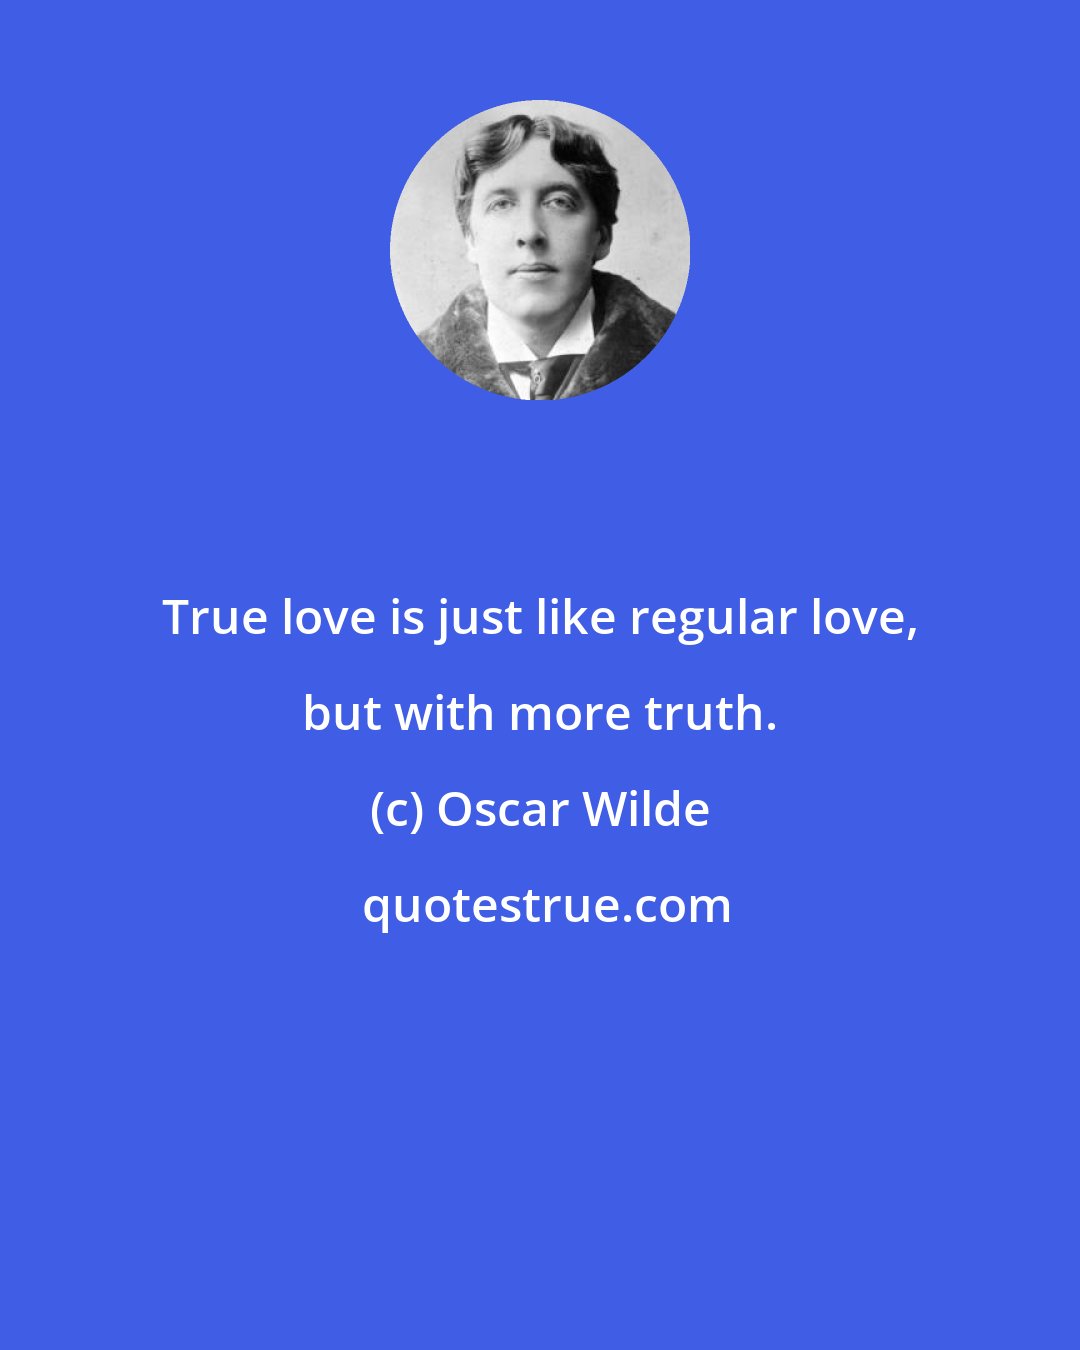 Oscar Wilde: True love is just like regular love, but with more truth.